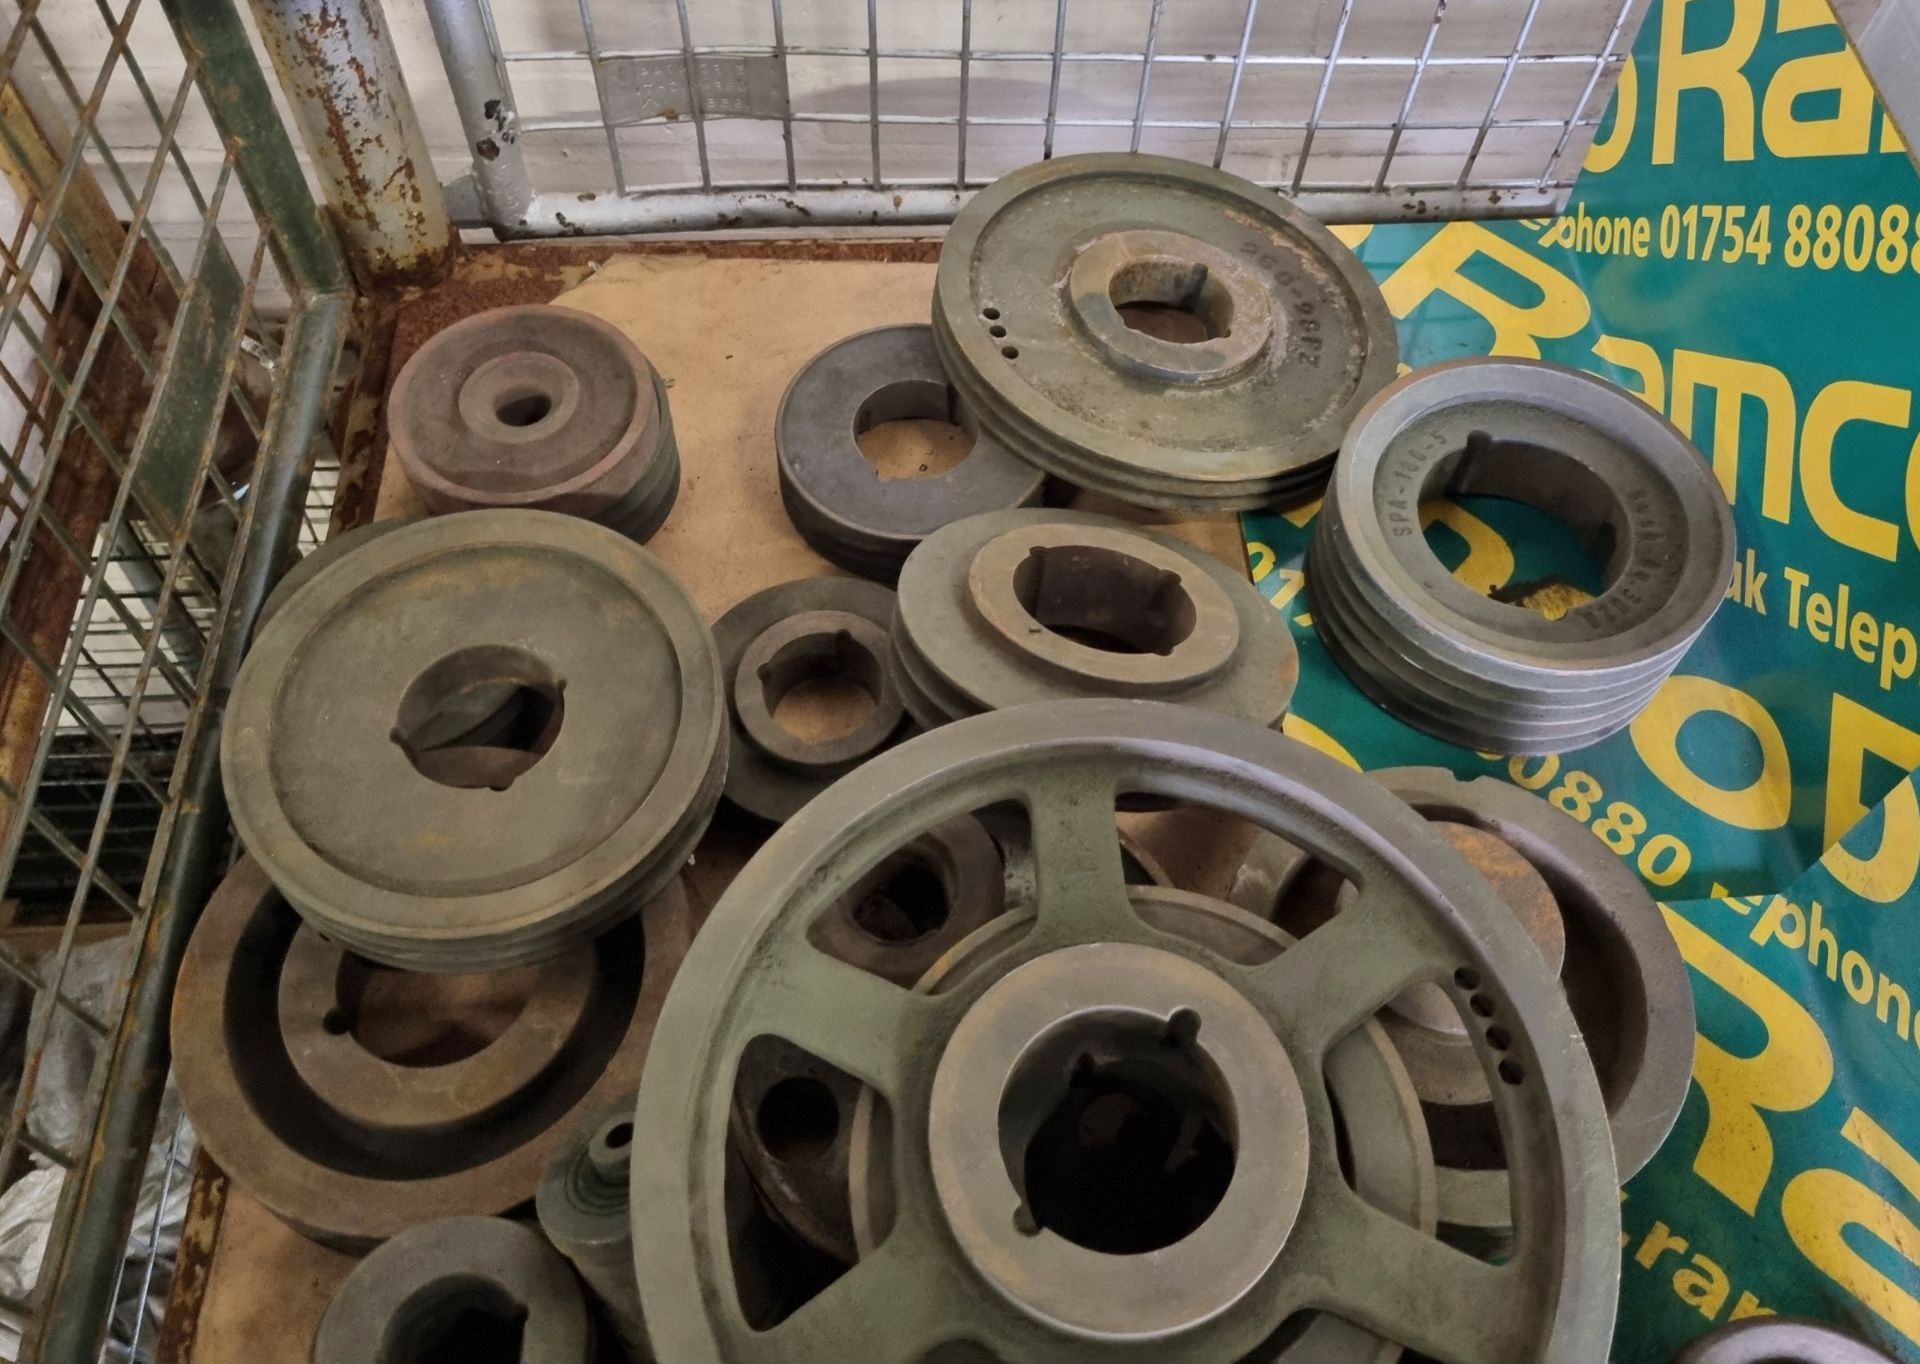 Steel belt pulley wheels - various amount, sizes and types - Image 2 of 4